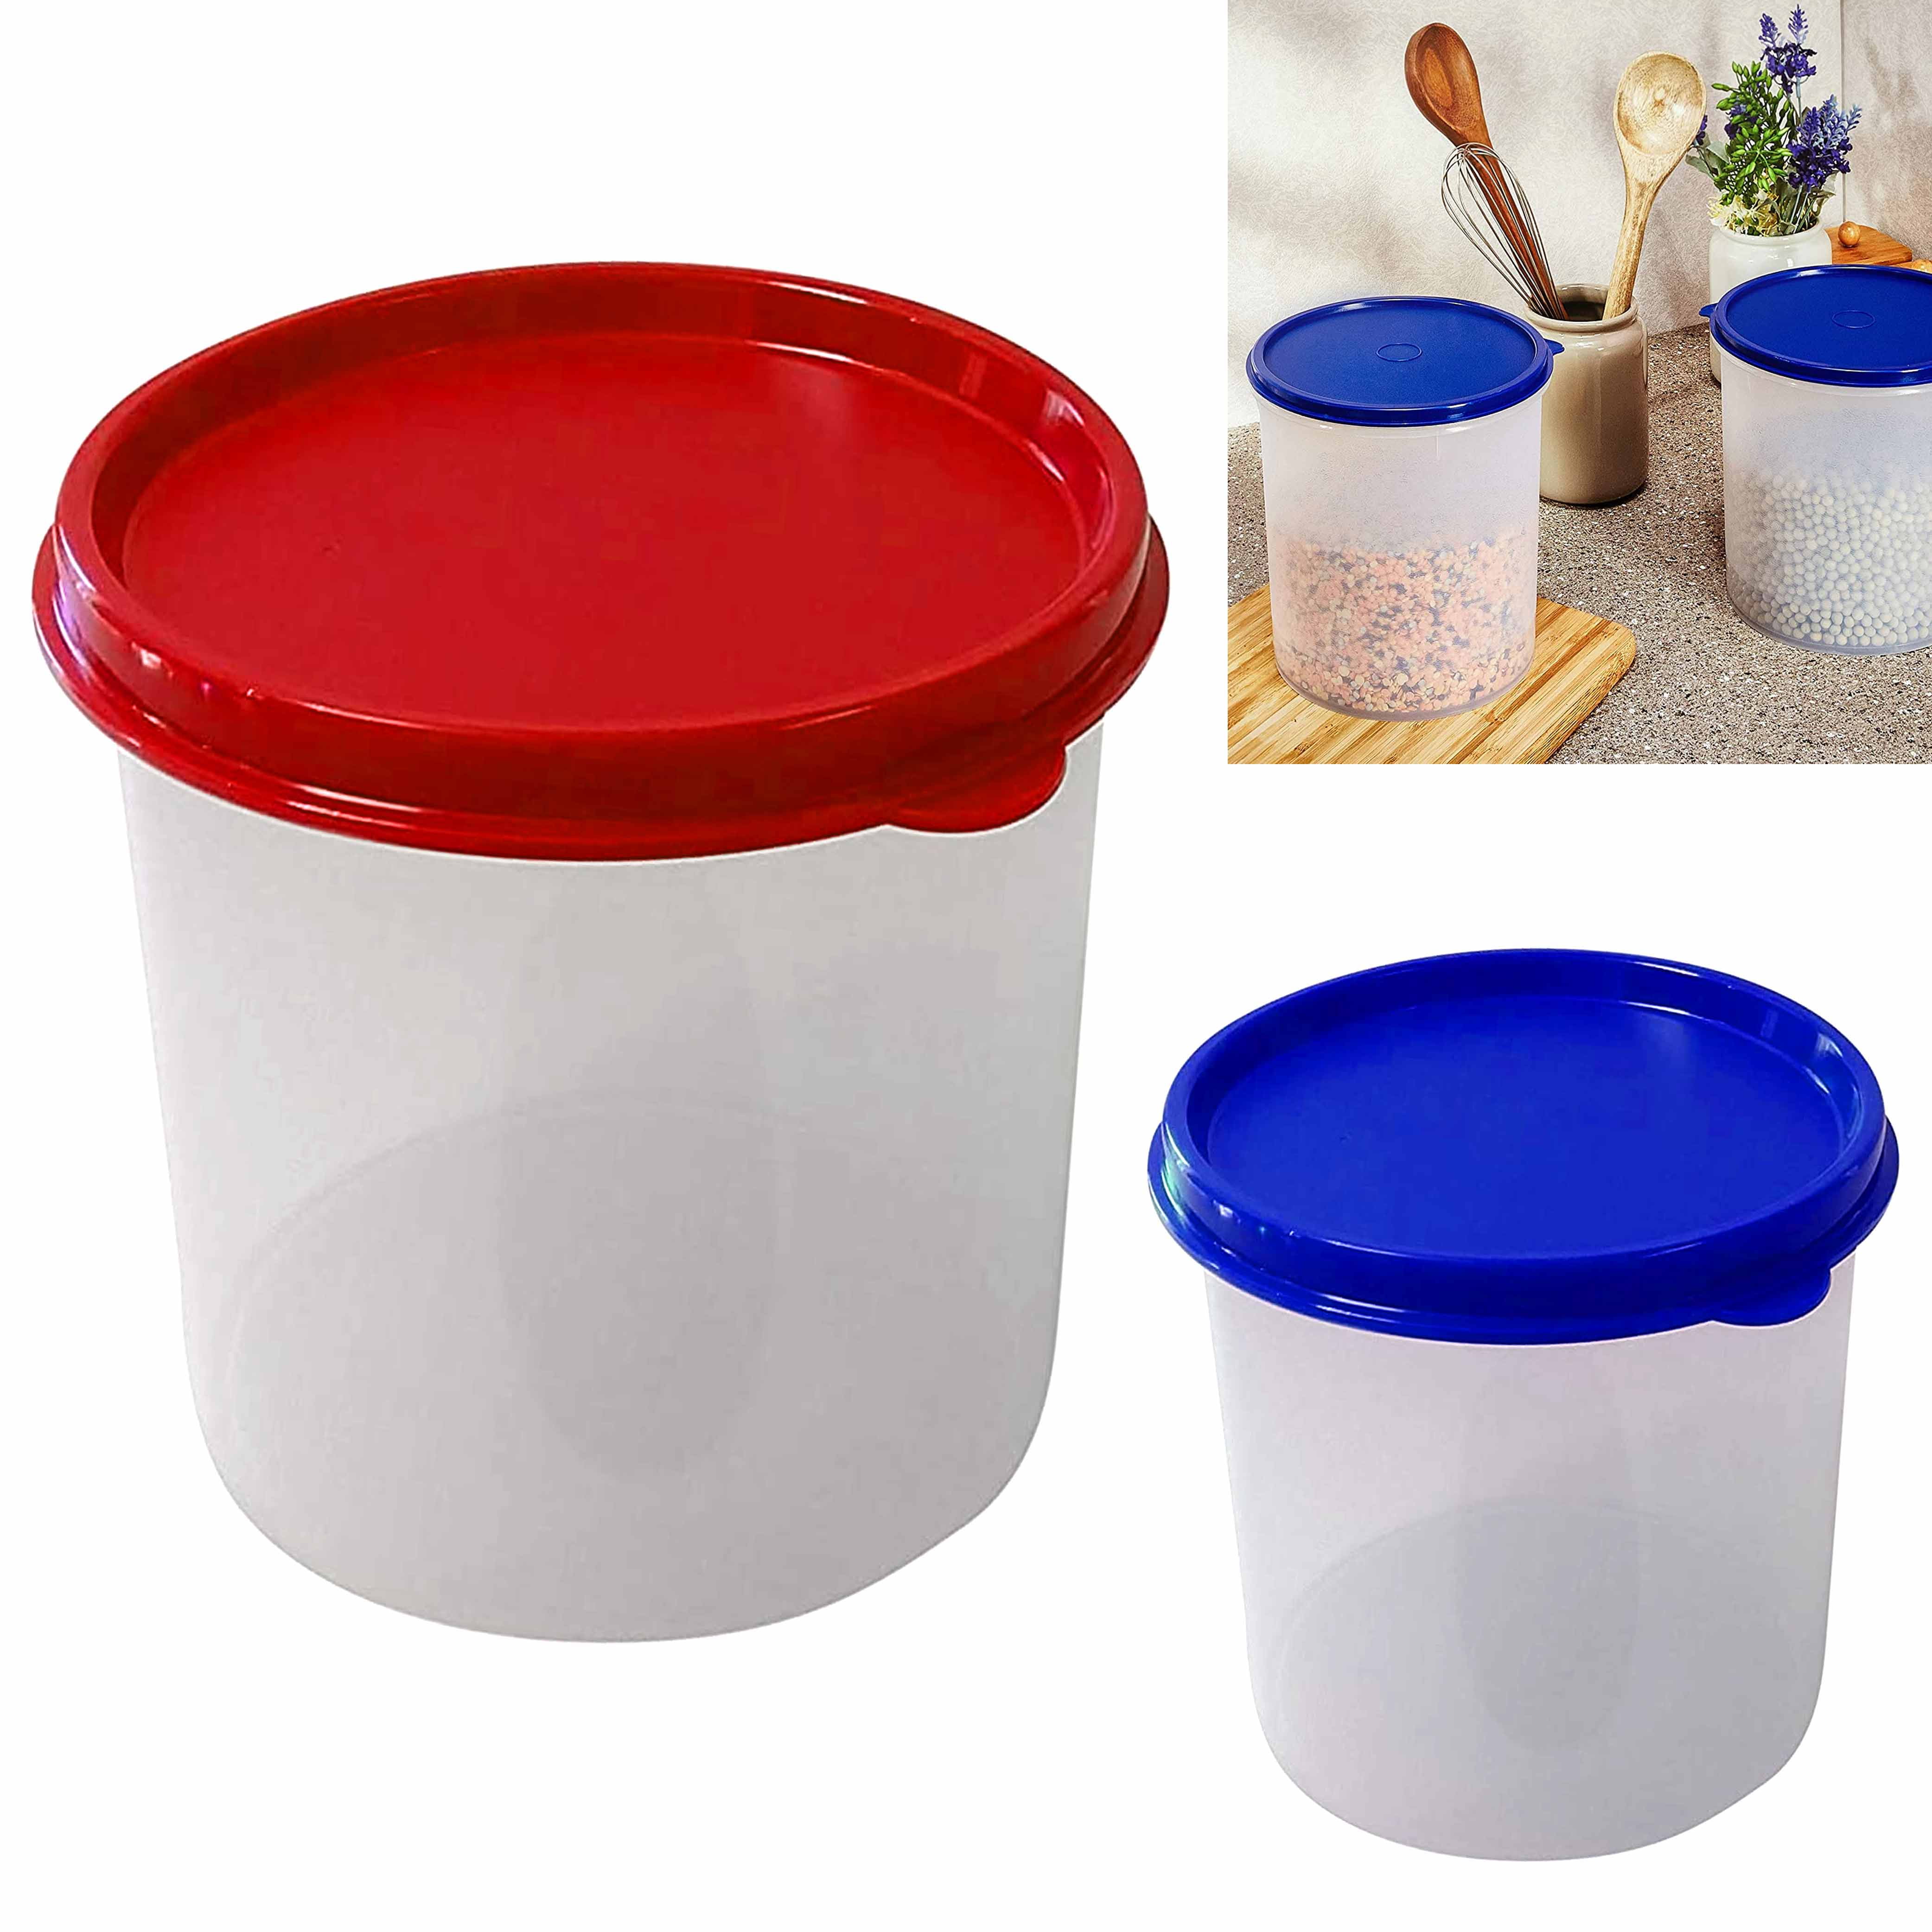 1/4 Gallon (32 oz.) BPA Free Food Grade Round Container with Lid